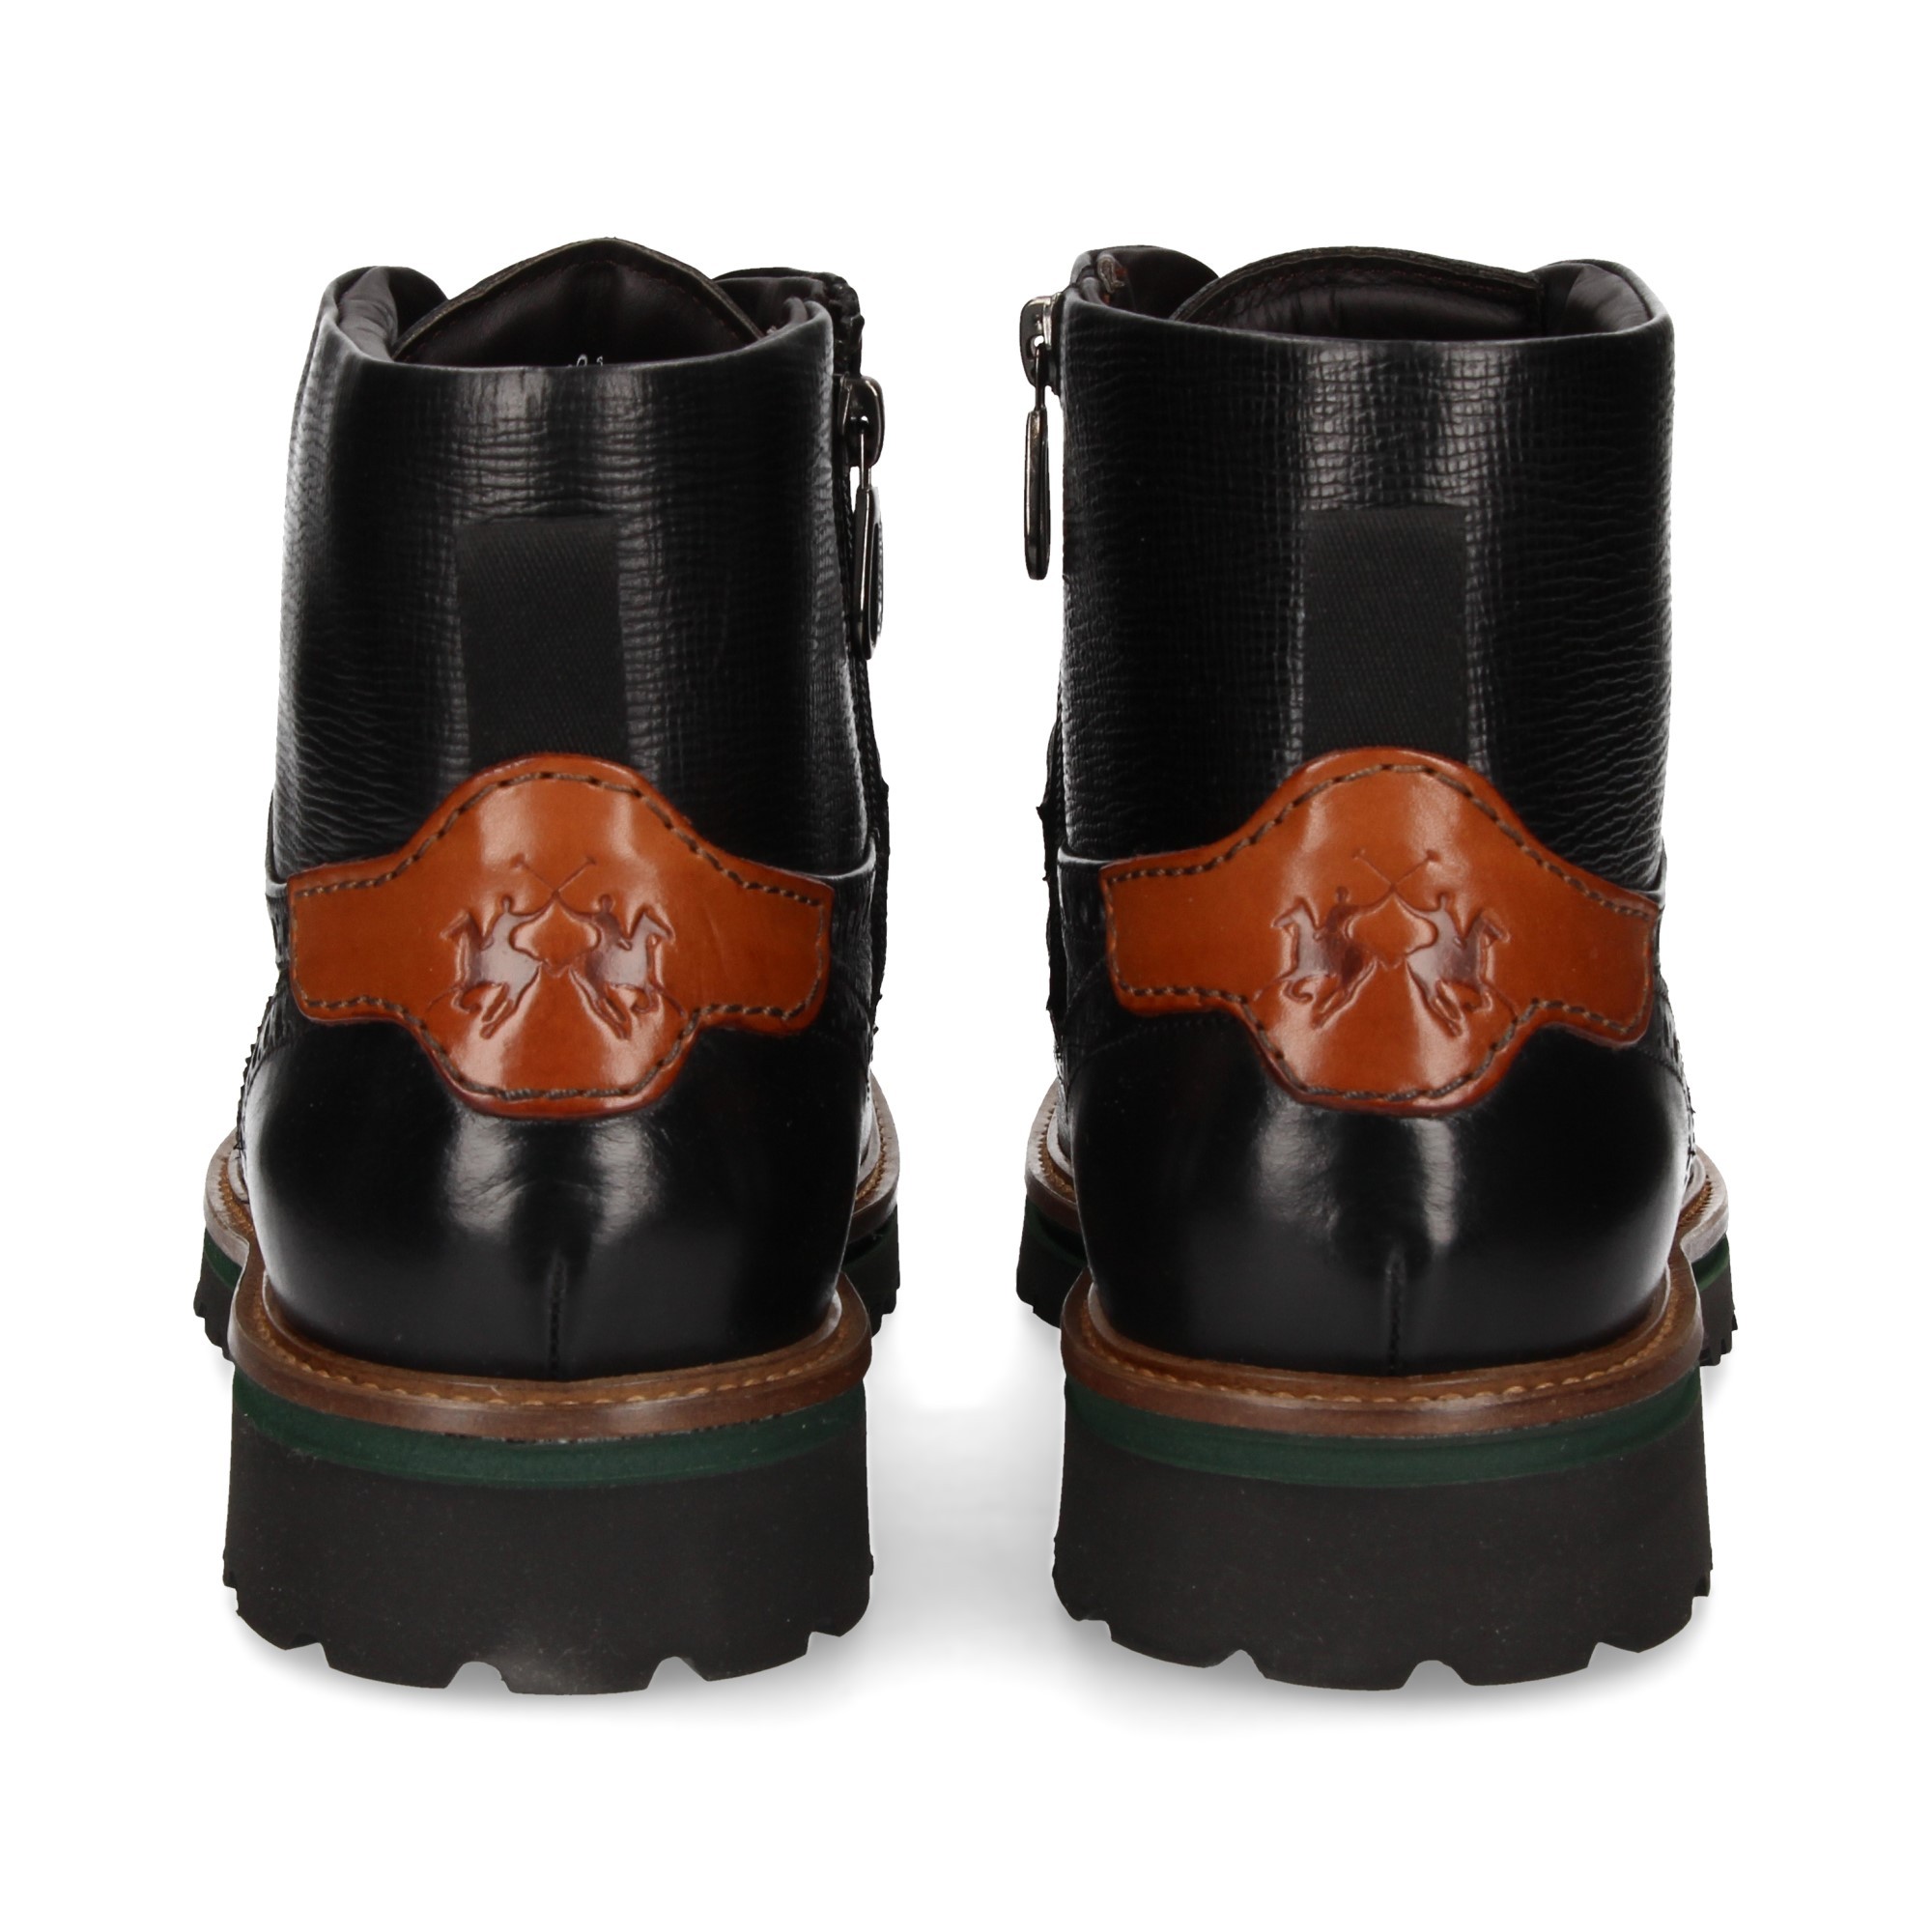 mountain-boot-inside-hair-black-leather-mountain-boot